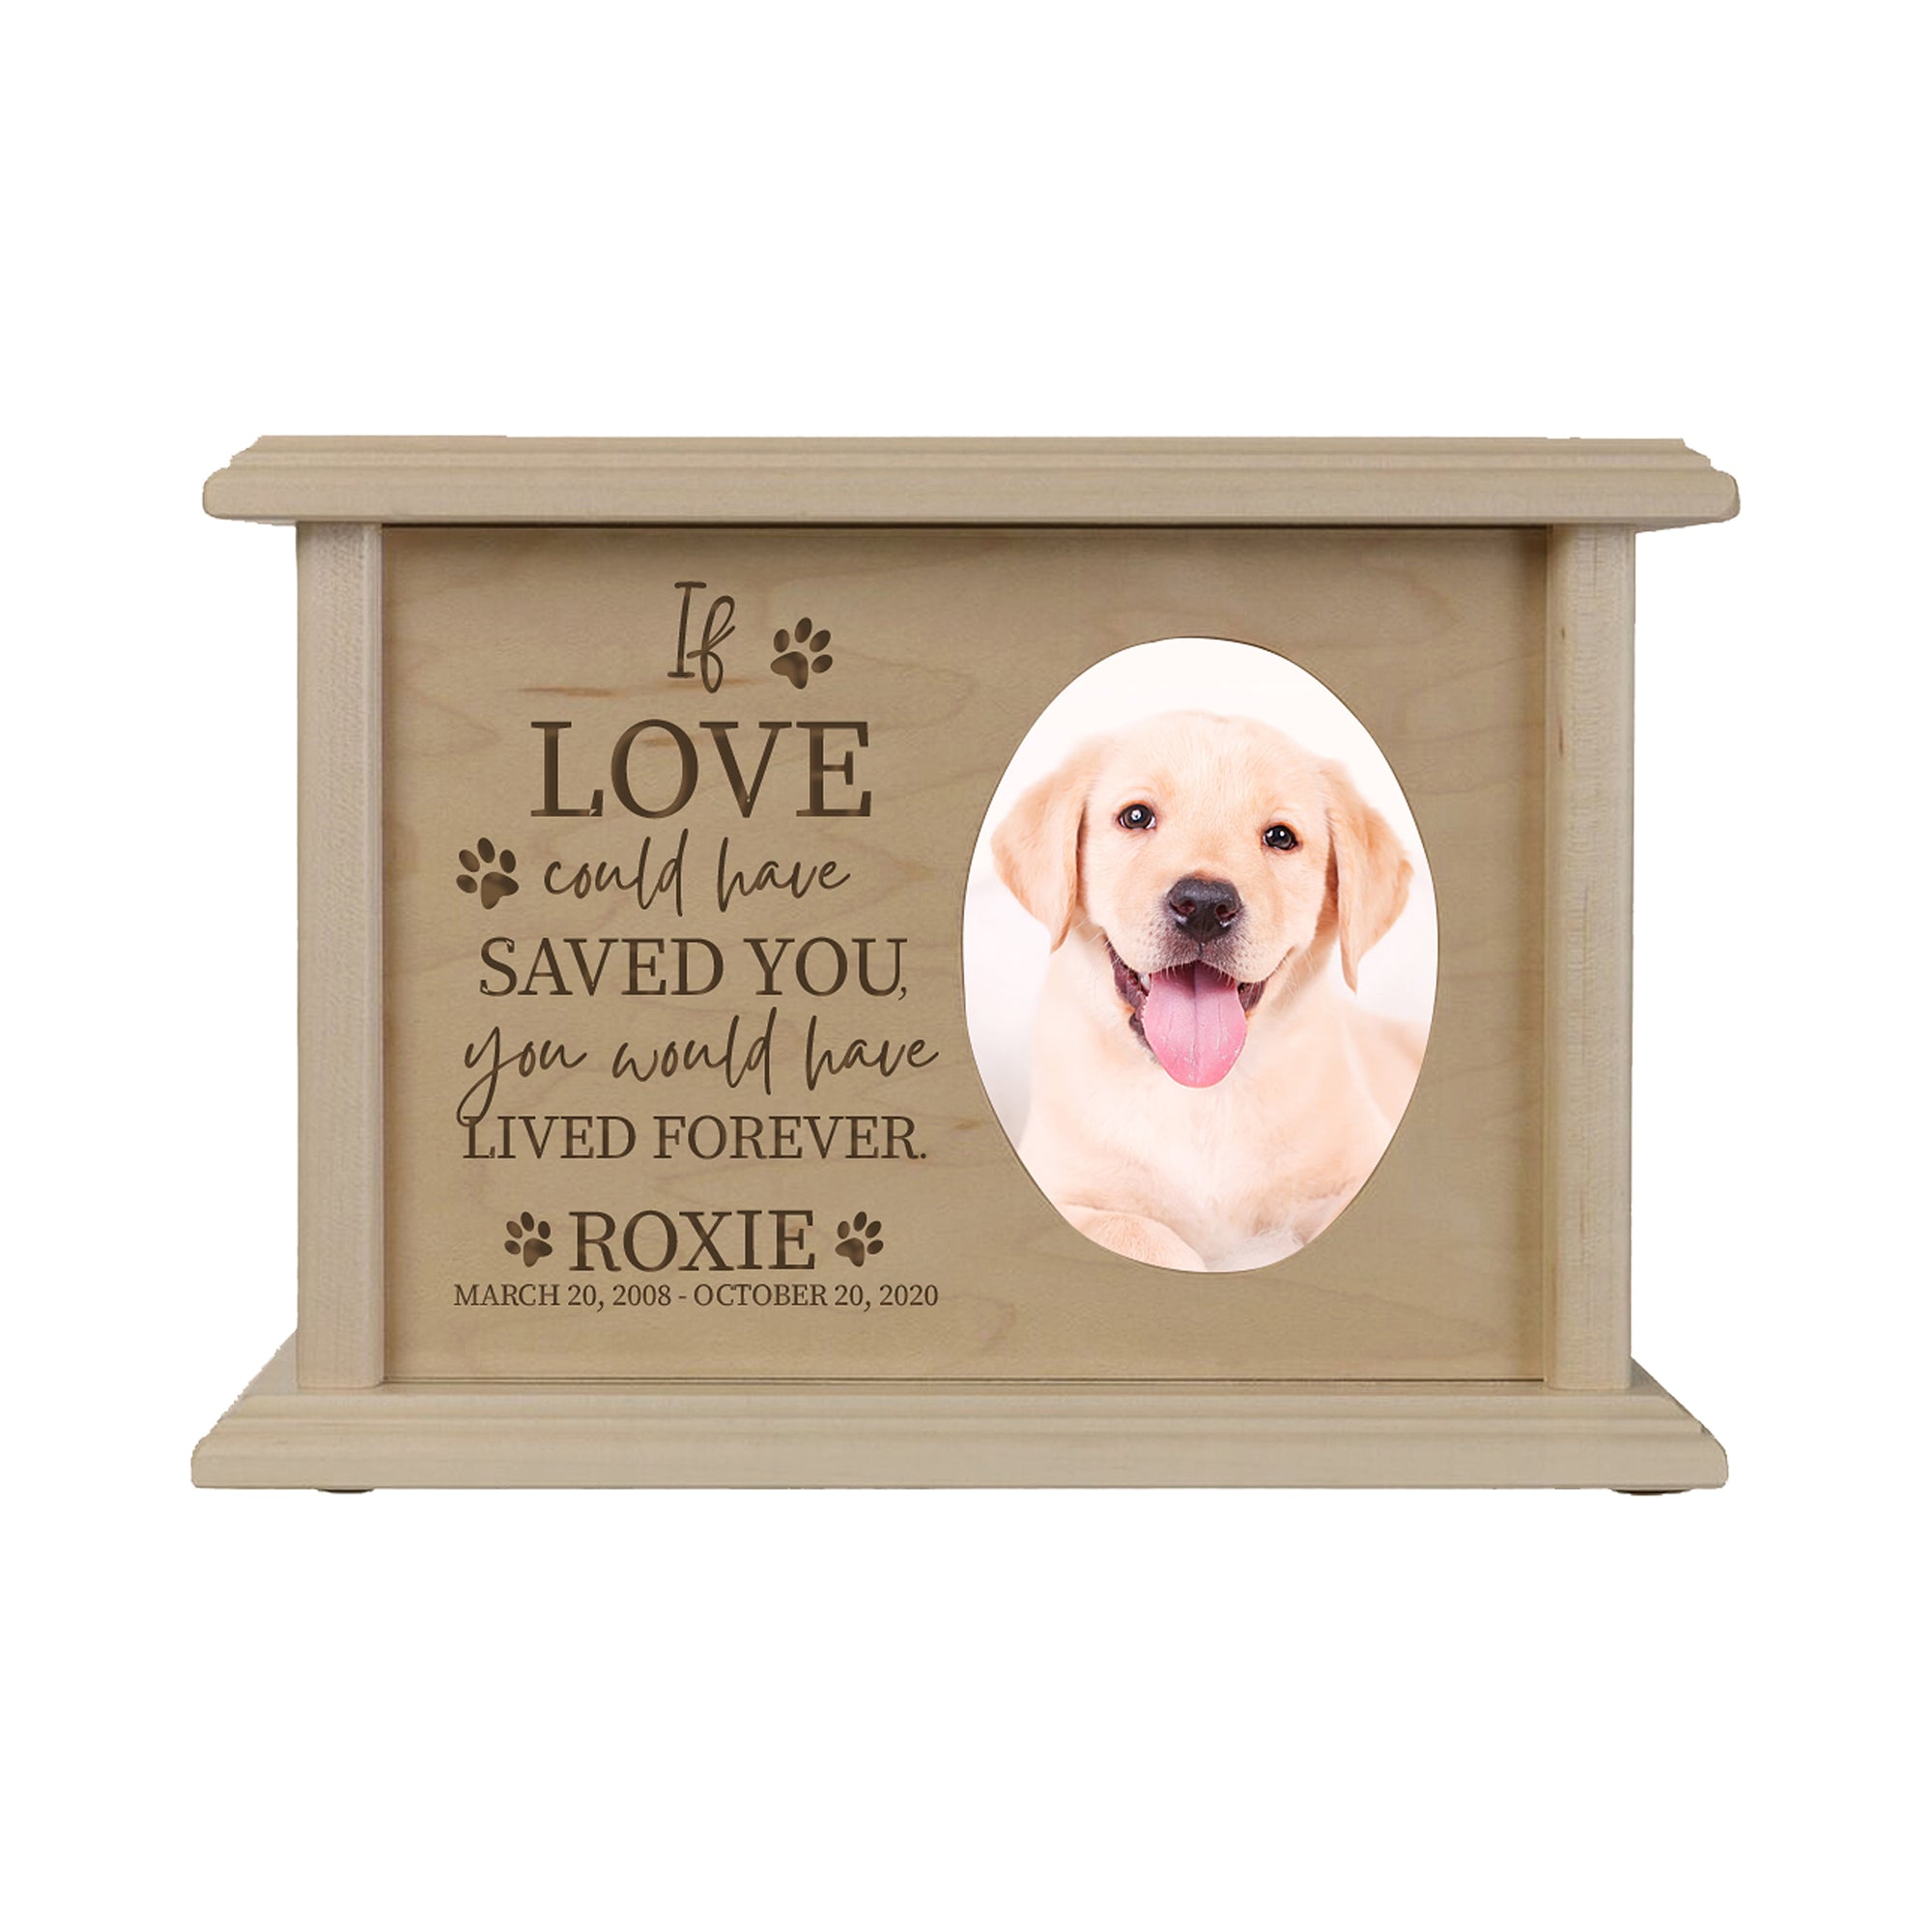 Lifesong Memorials Custom Pet Memorial Urn Box holds 2x3 photo and 65 cu in If Love Could. Sympathy Gift for the Loss of a Loved One Bereavement Condolence Sympathy Comfort Keepsake Funeral Decoration. Cremation Urns, urn for ashes, urns for humans, urns for dad, urns for mom, urns for sale, urns for human ashes, Pet keepsake urns, pet urns, cherished urns, small urns, small urns for ashes, Wooden Urns, Wooden Keepsake Urn, Wood Cremation Urns.